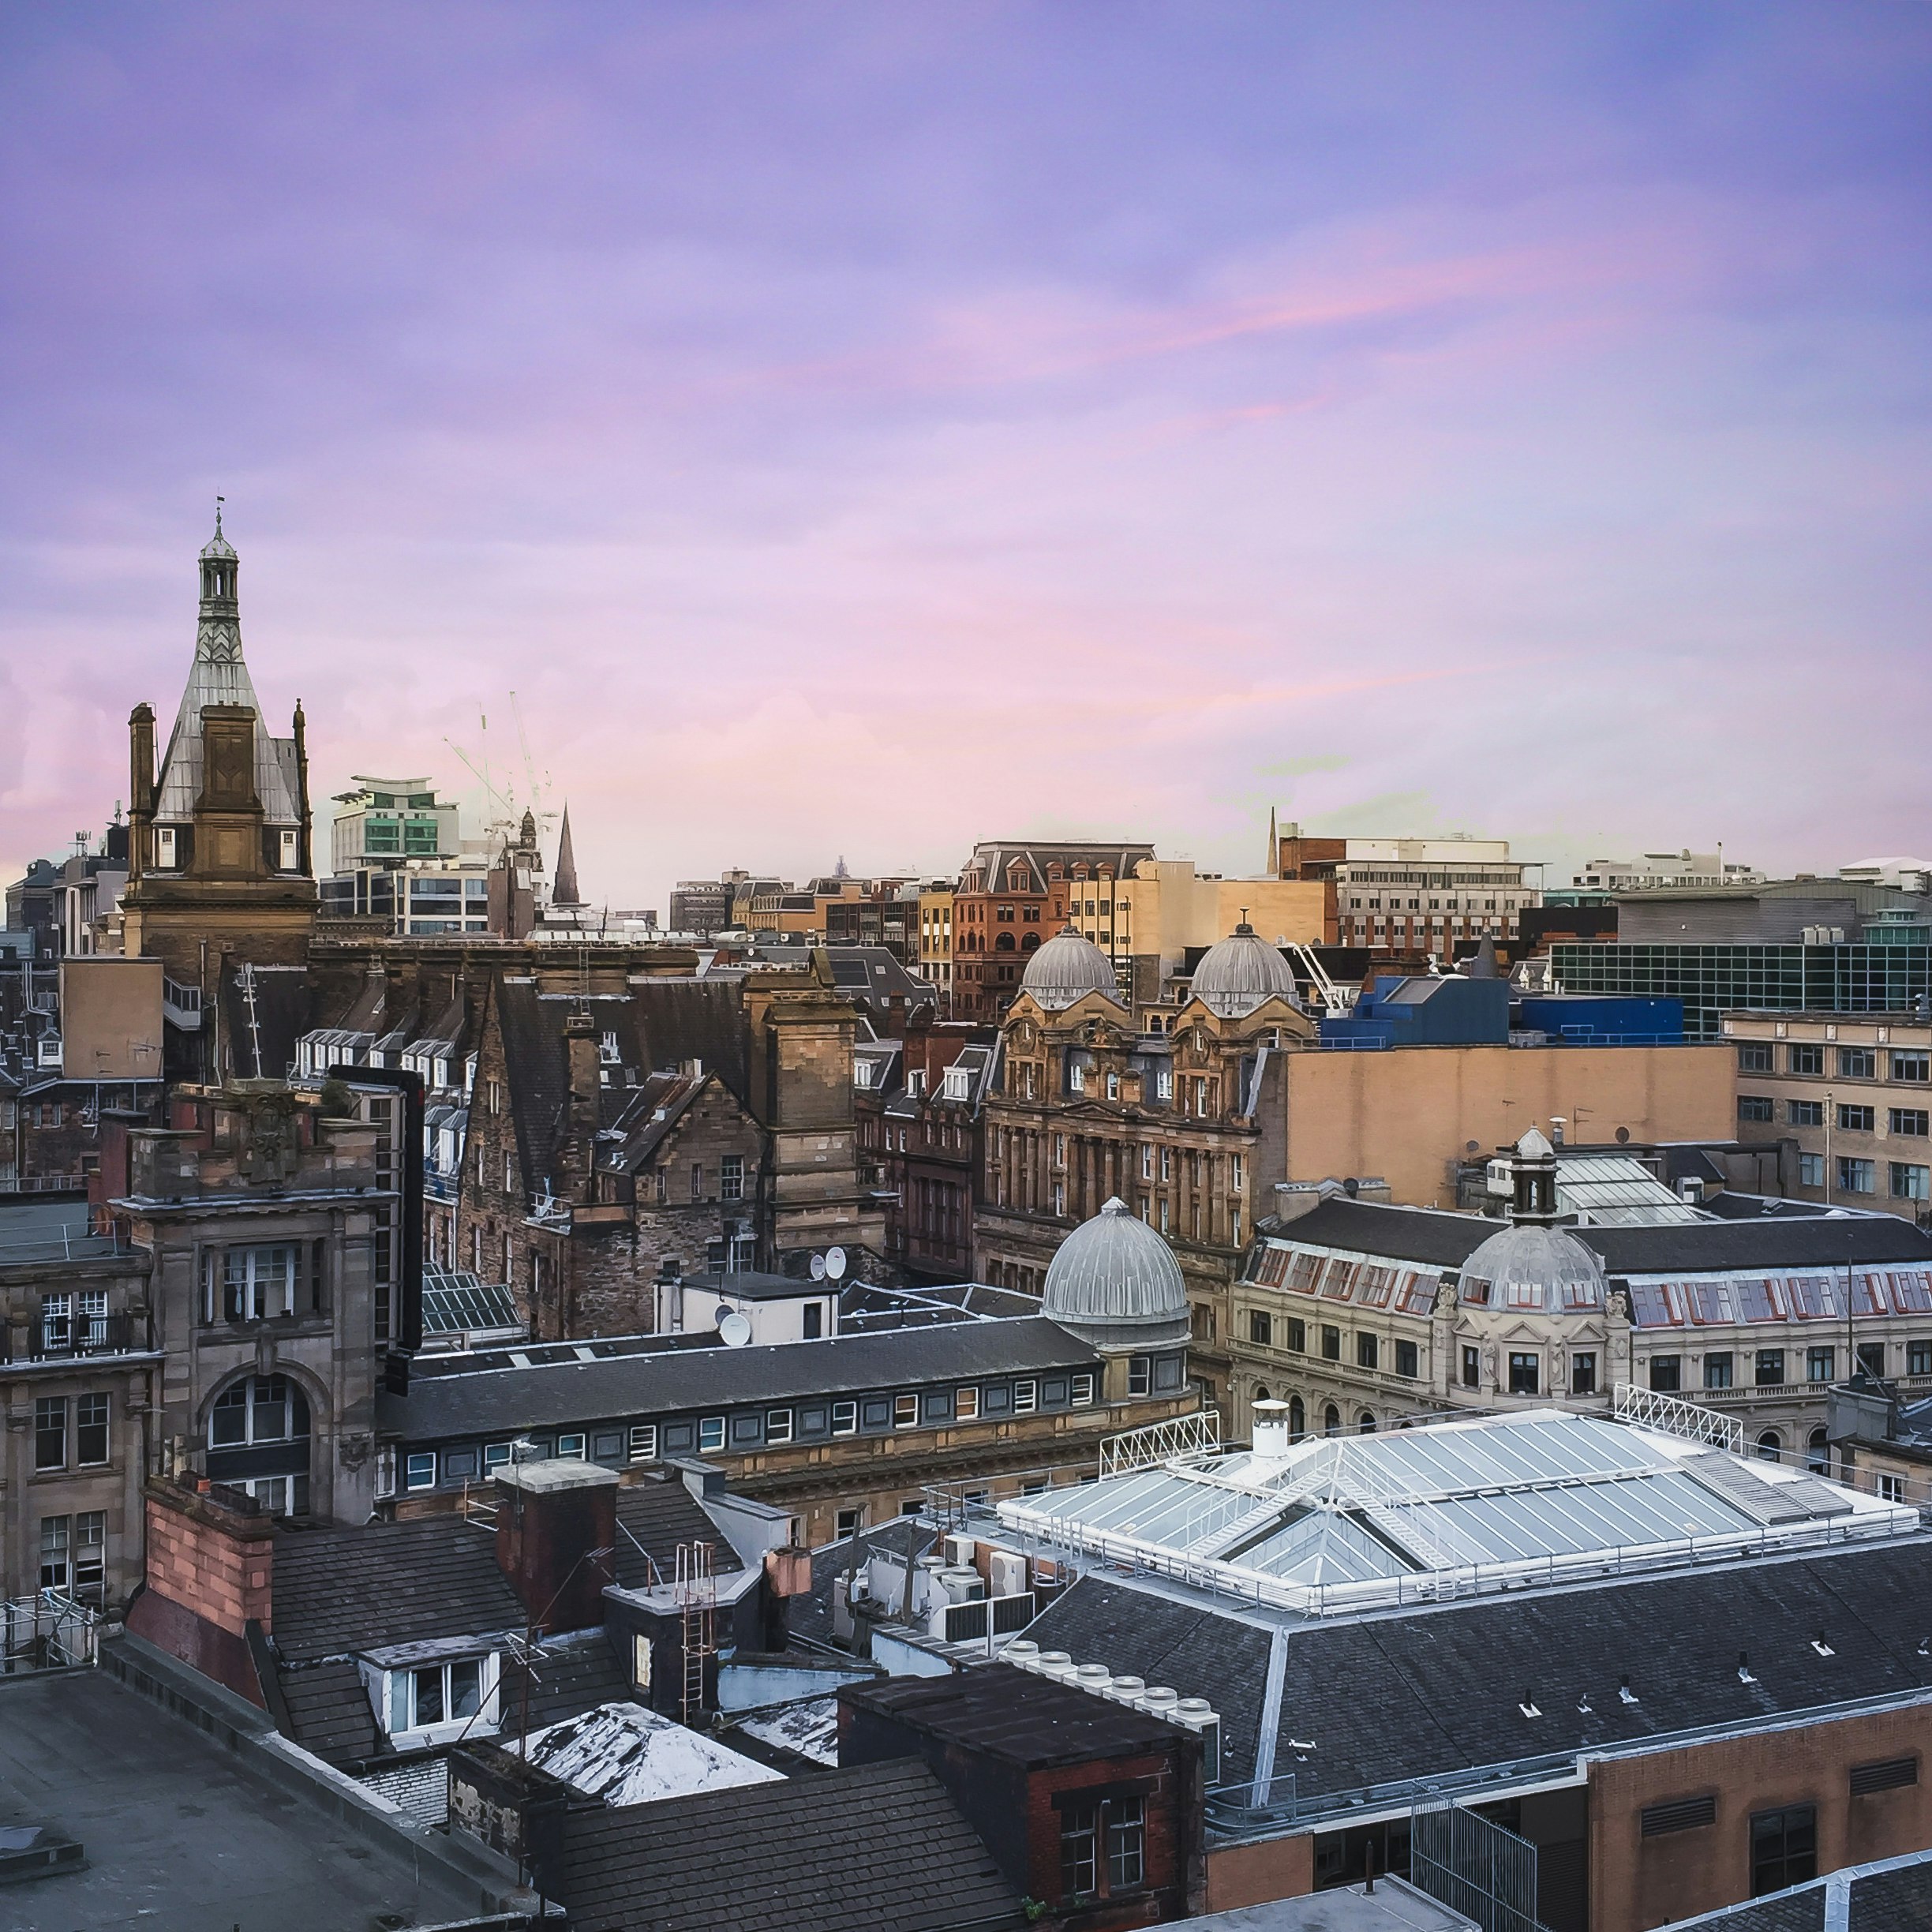 View of Glasgow's grey stone buildings and rooftops from The Lighthouse.